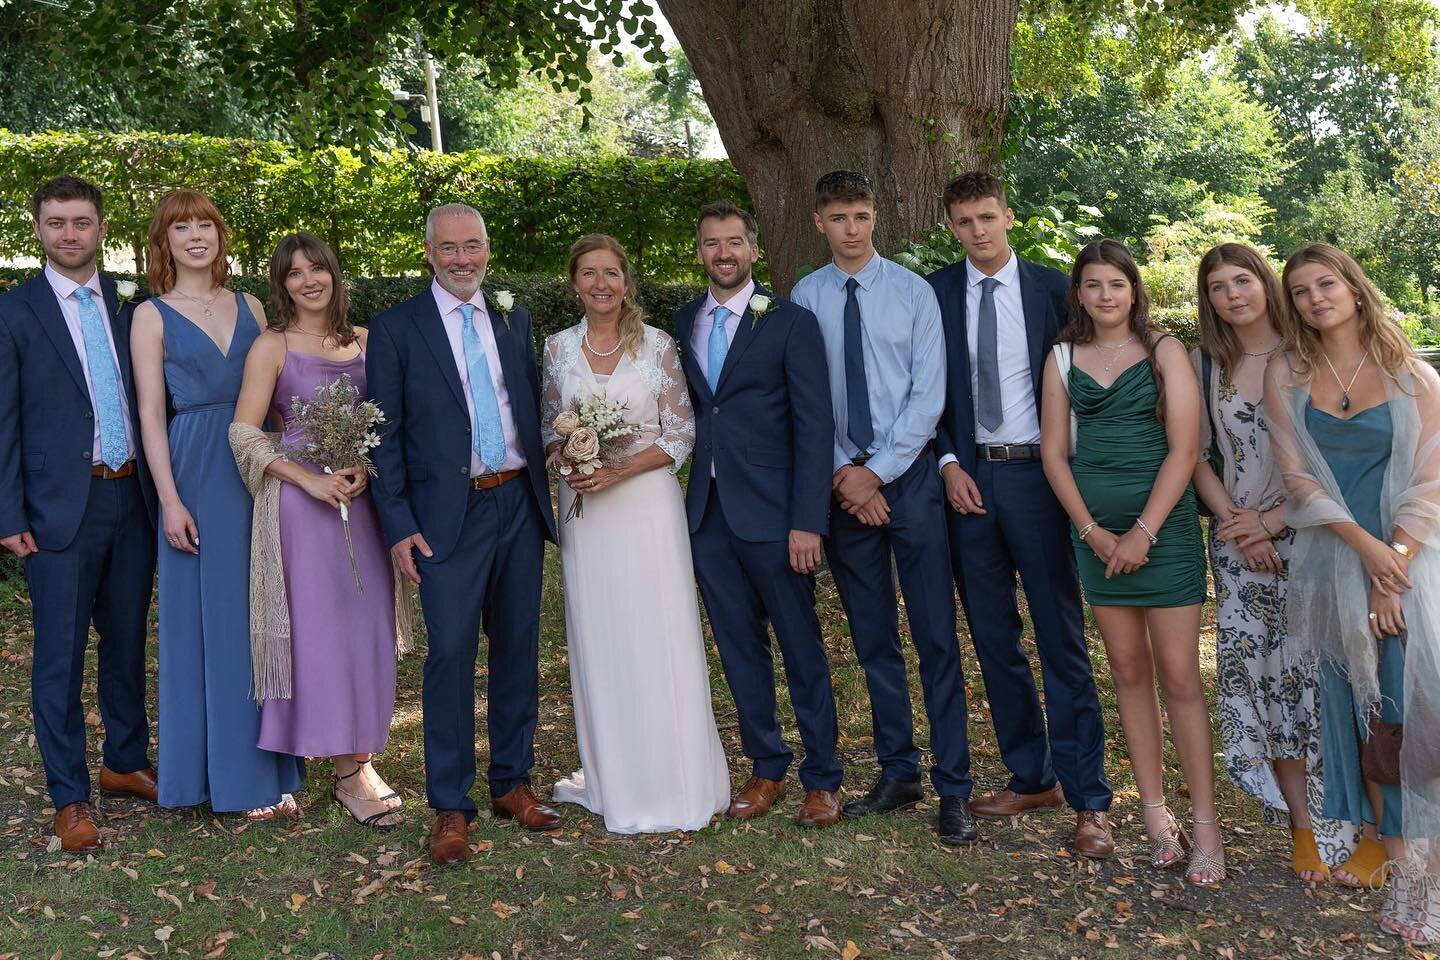 Every Bride &amp; Groom (and the photographer) hope for good sunny weather for a summer wedding in the UK.
 
The week commencing 4th of September did not disappoint, though at 30&deg; a few of us melted!
 
At the wedding of Simon &amp; Claire at the 